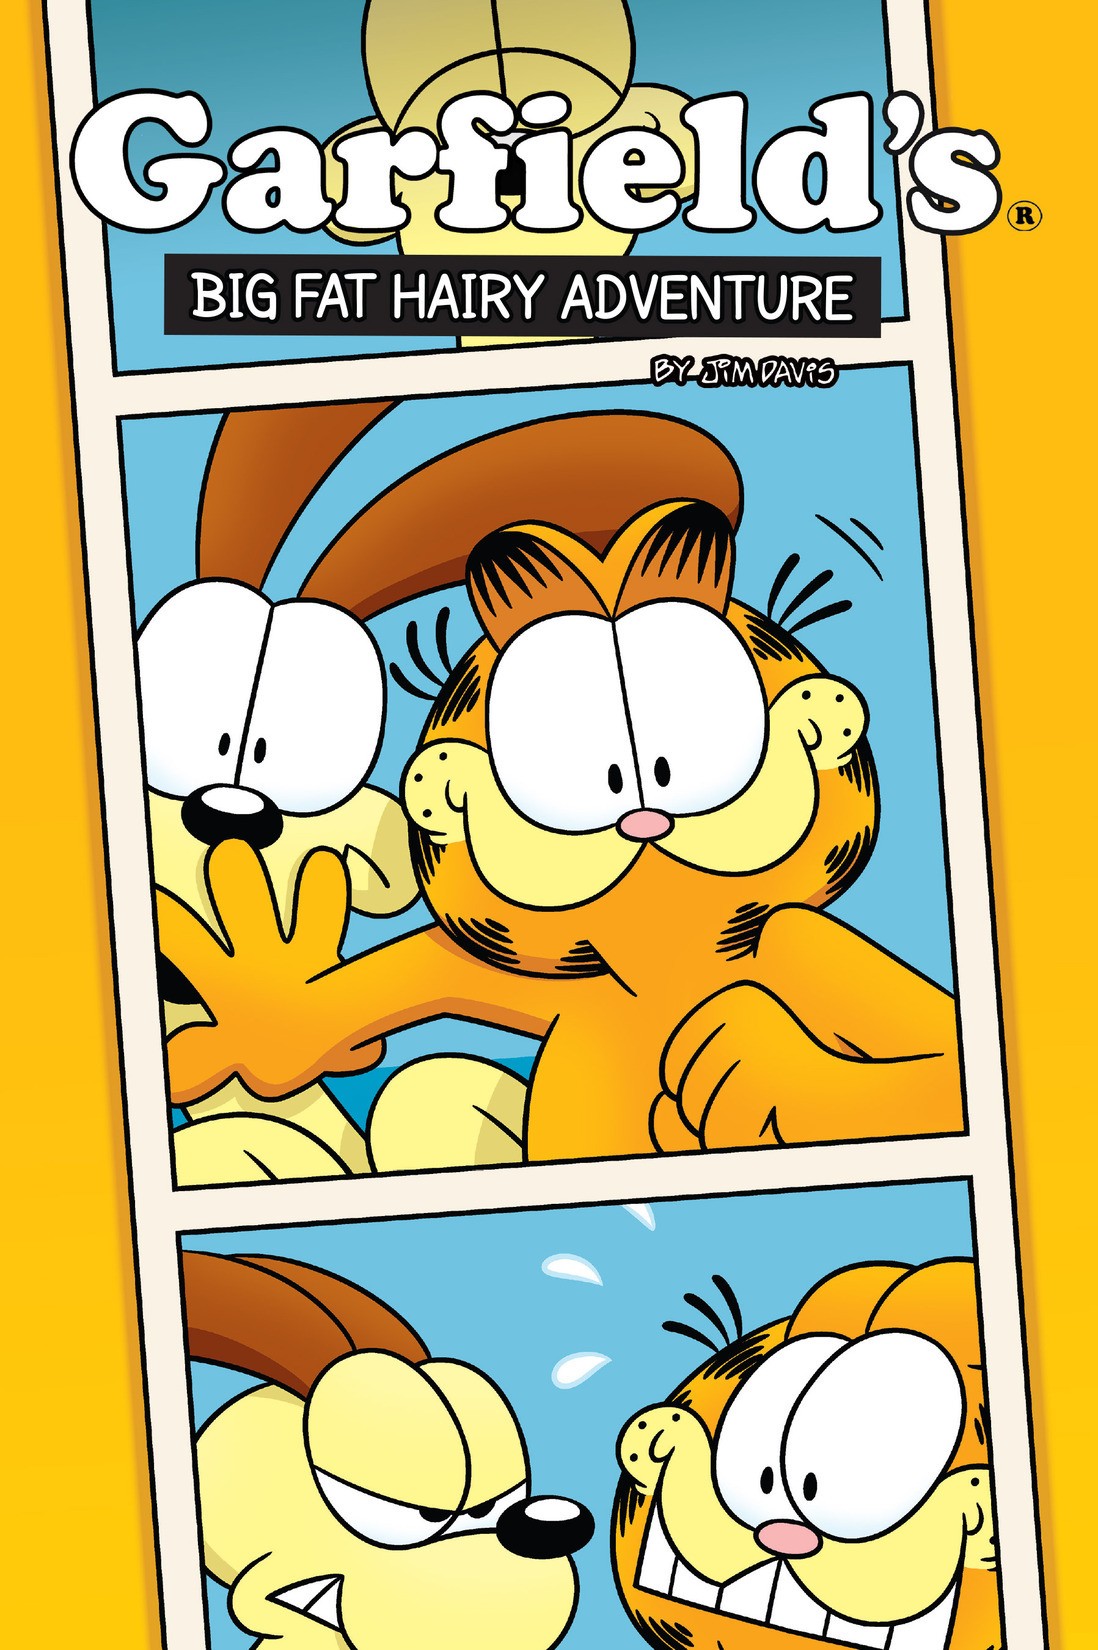 Garfield S Big Fat Hairy Adventure Issue 1 | Read Garfield S Big Fat Hairy  Adventure Issue 1 comic online in high quality. Read Full Comic online for  free - Read comics